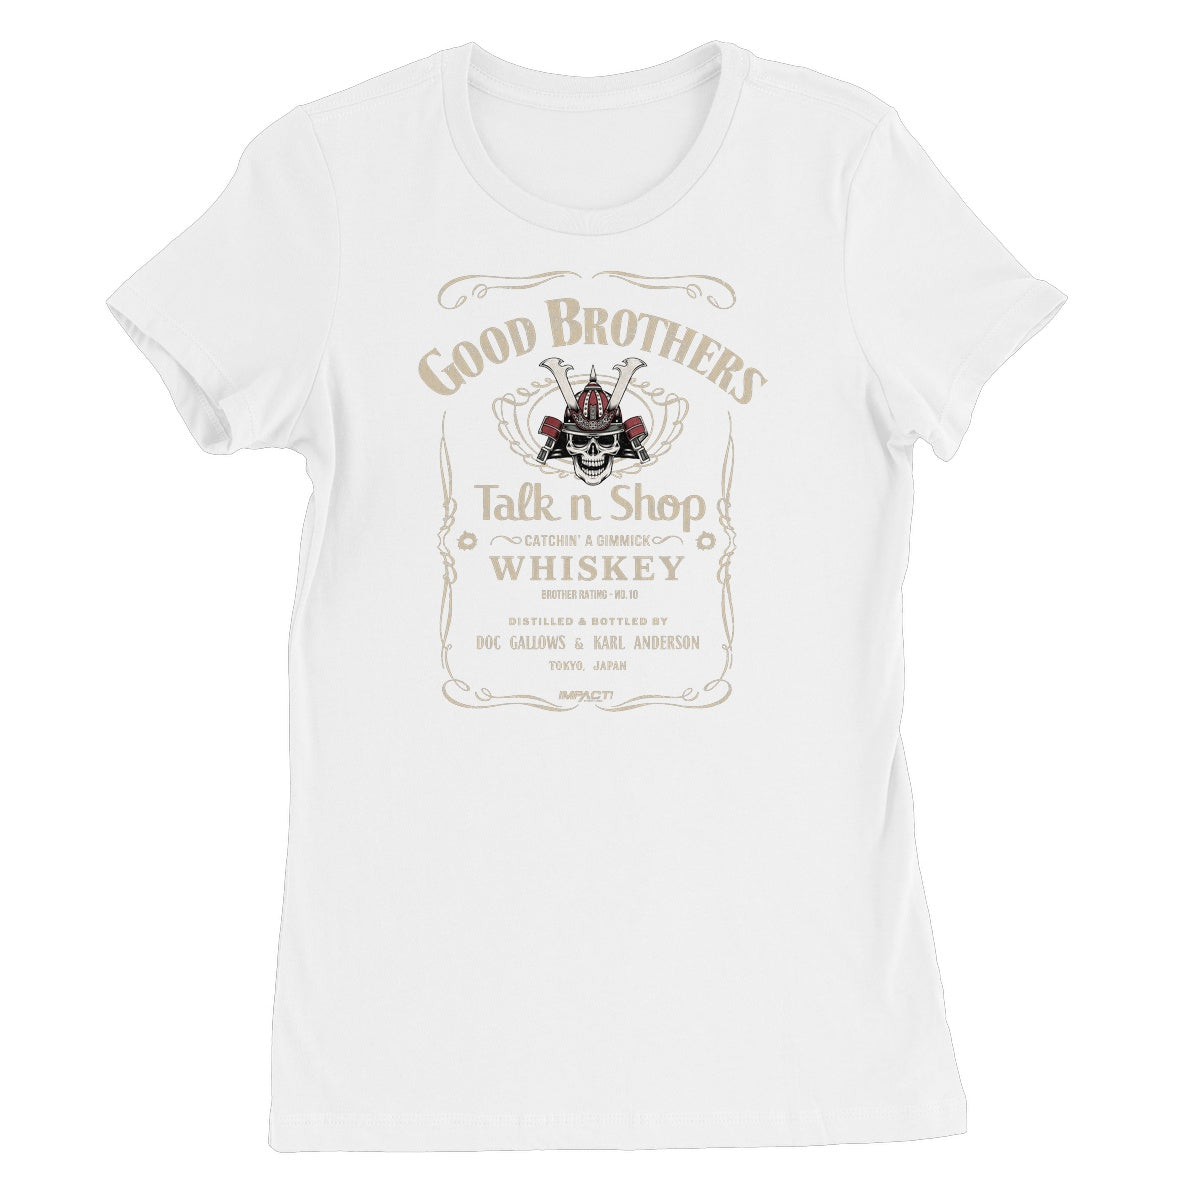 The Good Brothers 'Talk n Shop Women's Favourite T-Shirt